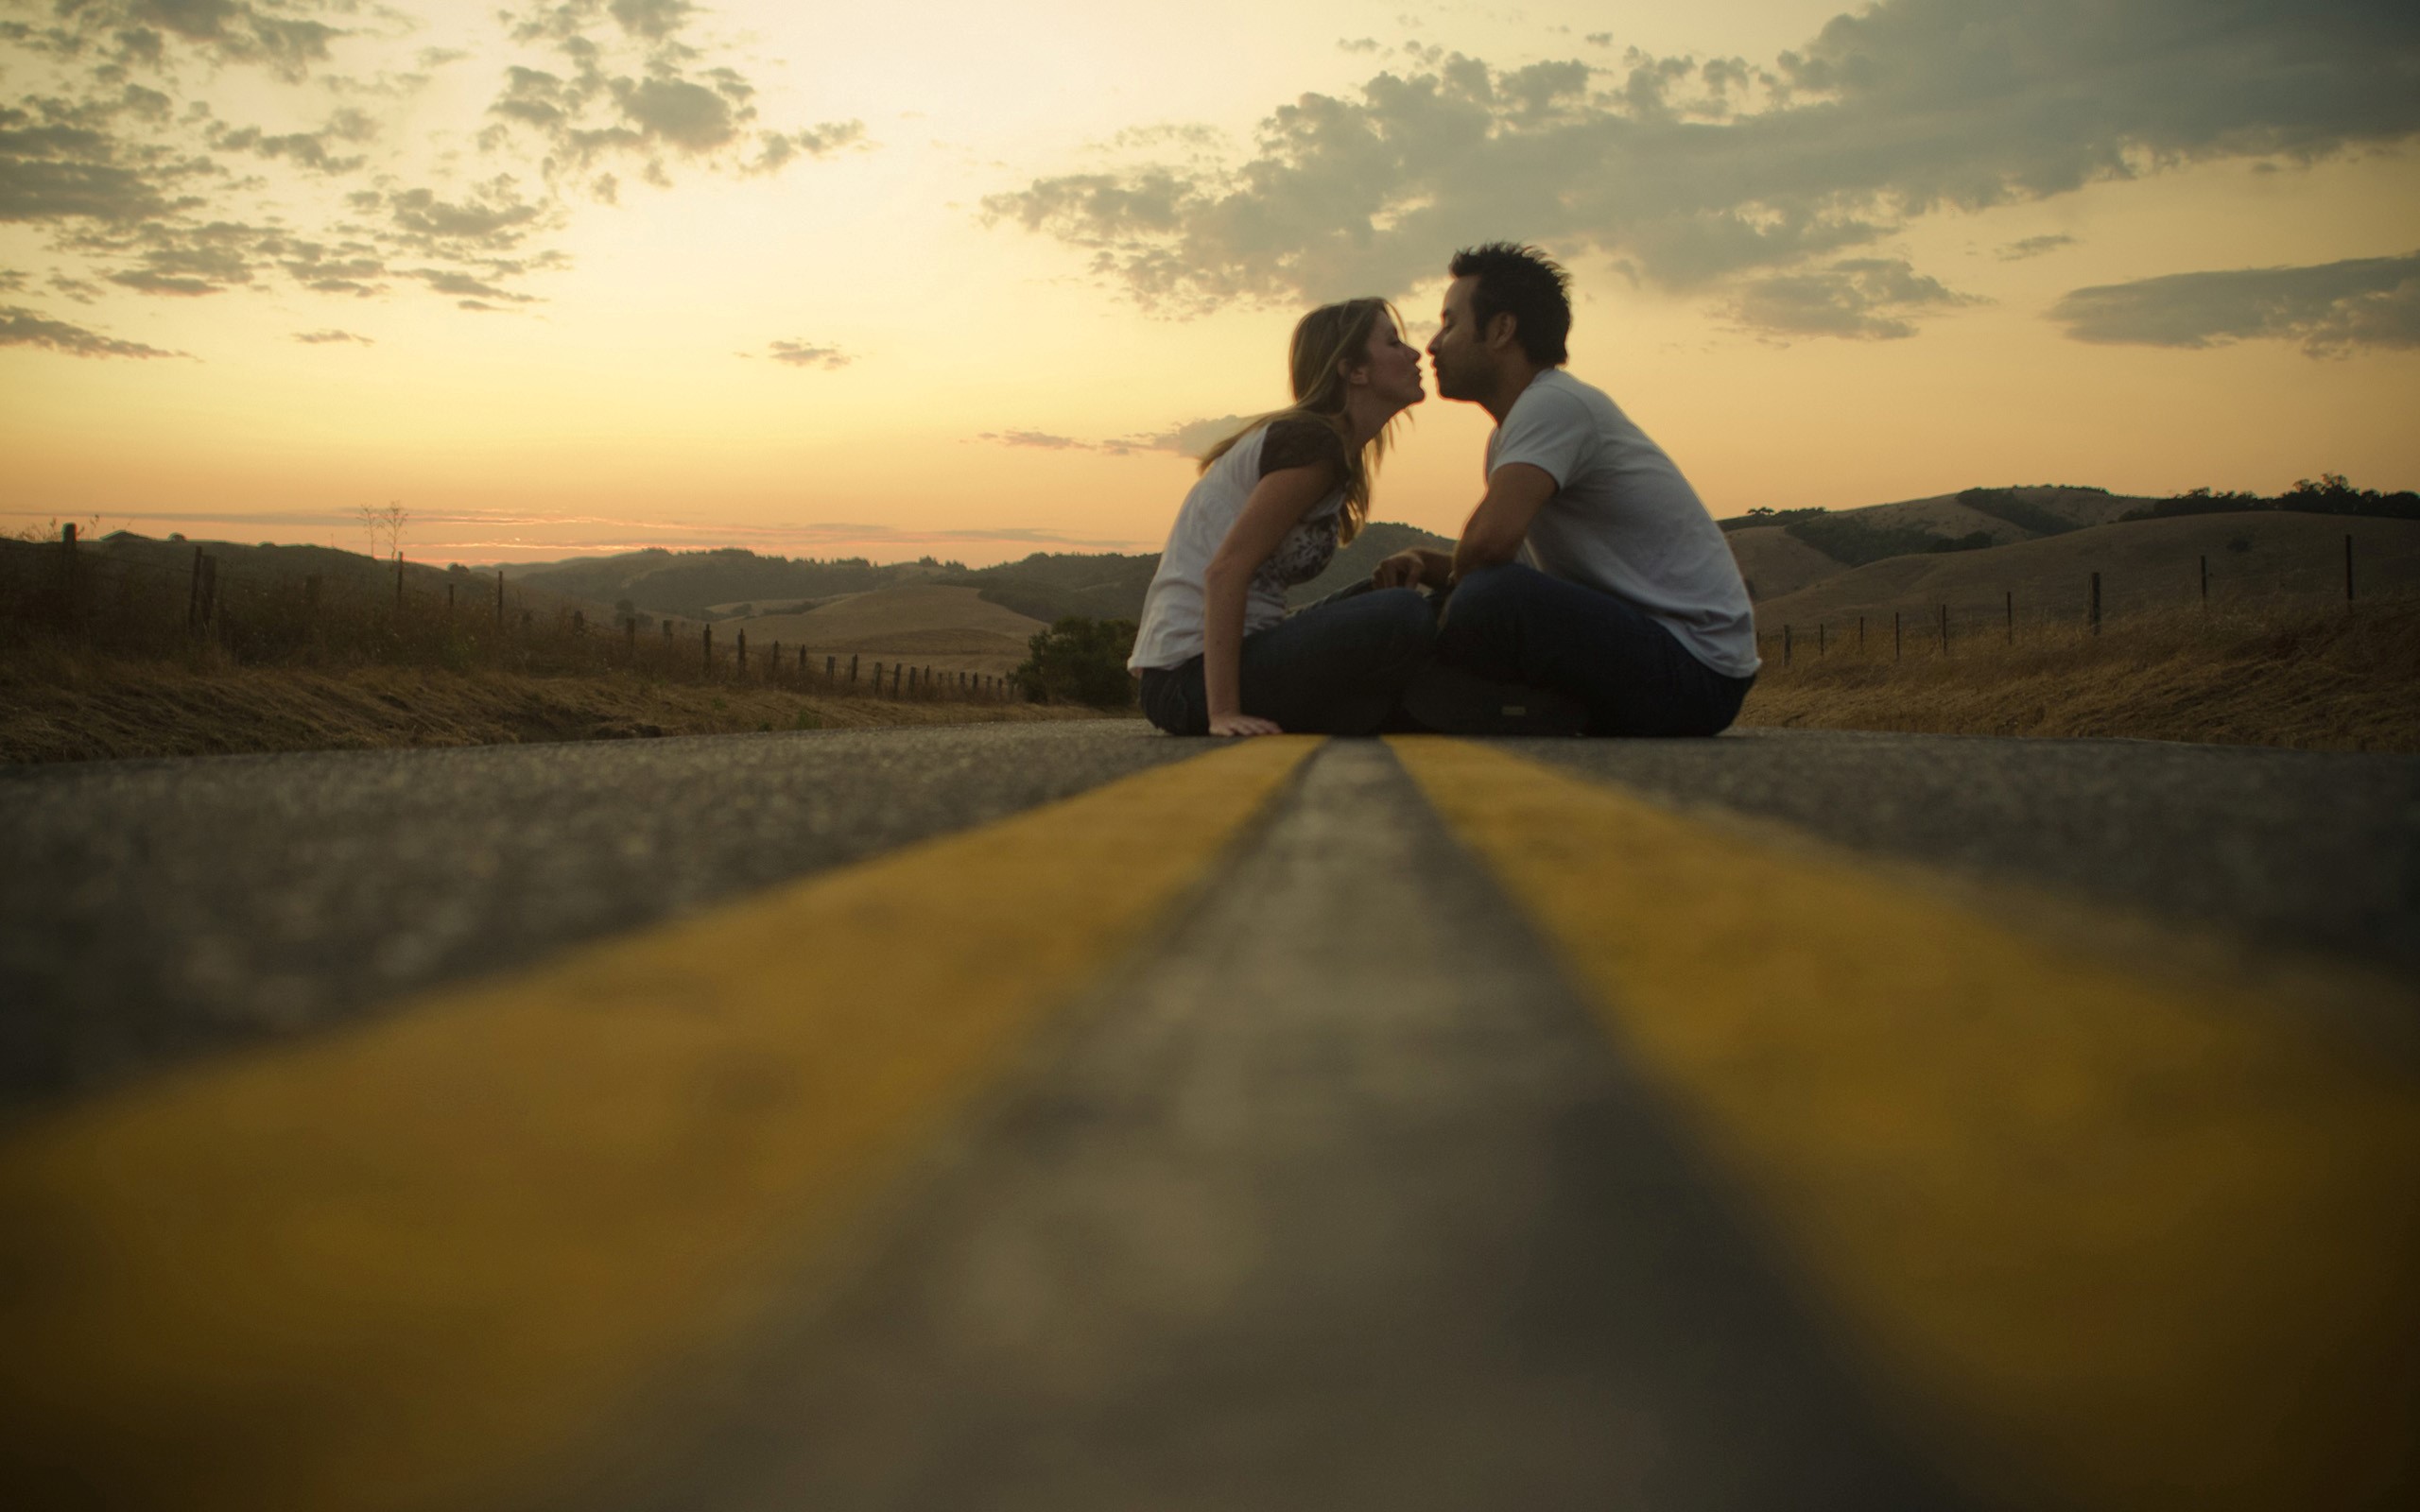 Cute Couple doing Romance on Road Wallpaper HD Wallpapers